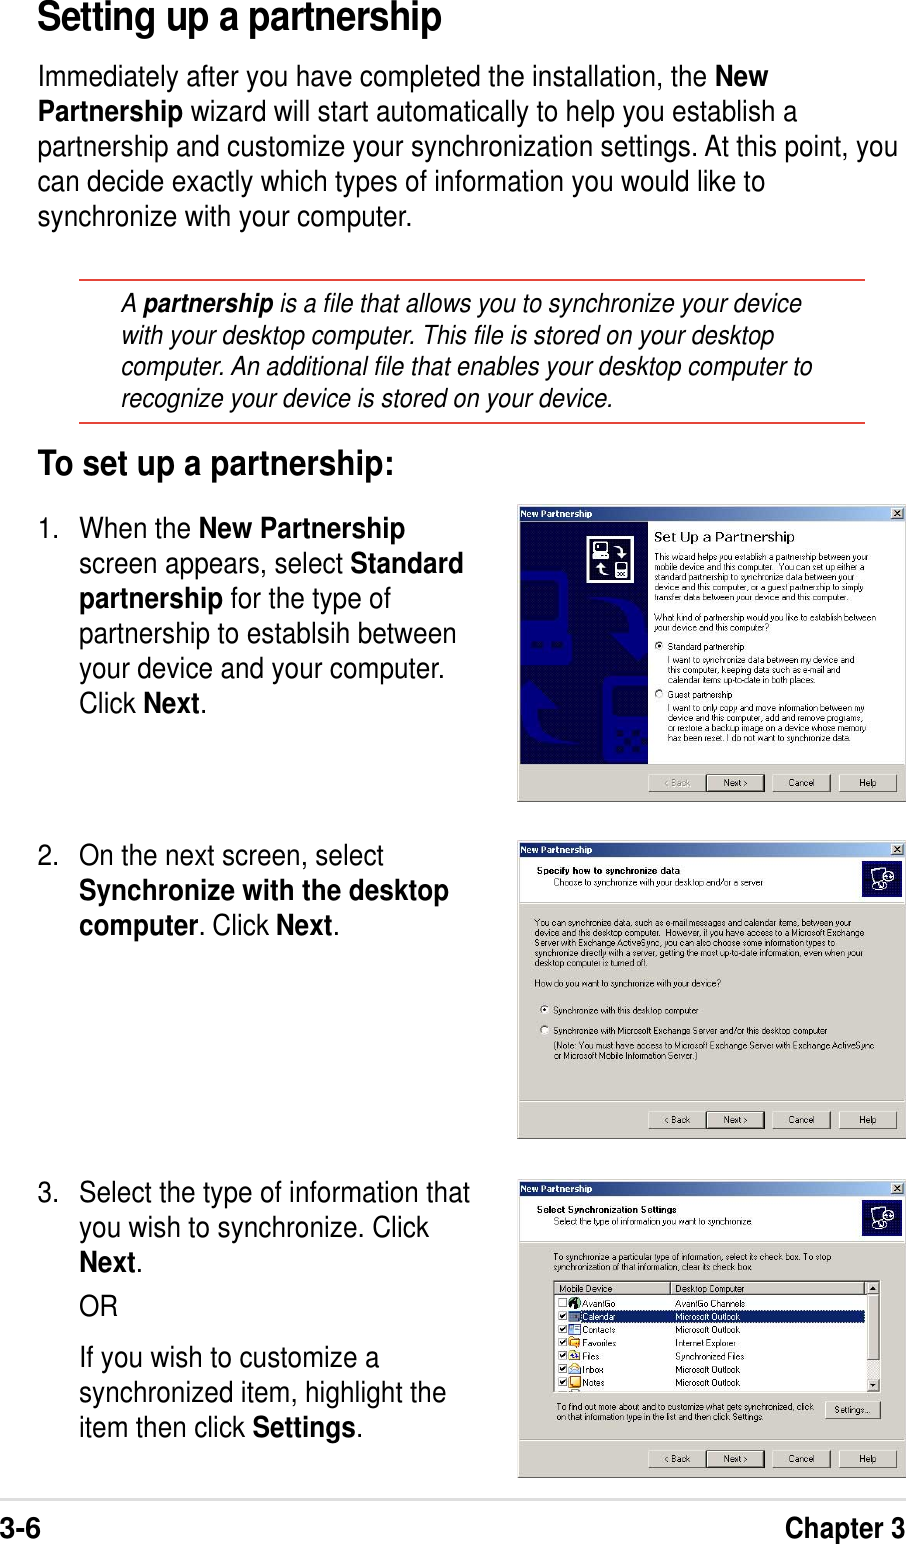 3-6Chapter 3Setting up a partnershipImmediately after you have completed the installation, the NewPartnership wizard will start automatically to help you establish apartnership and customize your synchronization settings. At this point, youcan decide exactly which types of information you would like tosynchronize with your computer.A partnership is a file that allows you to synchronize your devicewith your desktop computer. This file is stored on your desktopcomputer. An additional file that enables your desktop computer torecognize your device is stored on your device.2. On the next screen, selectSynchronize with the desktopcomputer. Click Next.3. Select the type of information thatyou wish to synchronize. ClickNext.ORIf you wish to customize asynchronized item, highlight theitem then click Settings.To set up a partnership:1. When the New Partnershipscreen appears, select Standardpartnership for the type ofpartnership to establsih betweenyour device and your computer.Click Next.